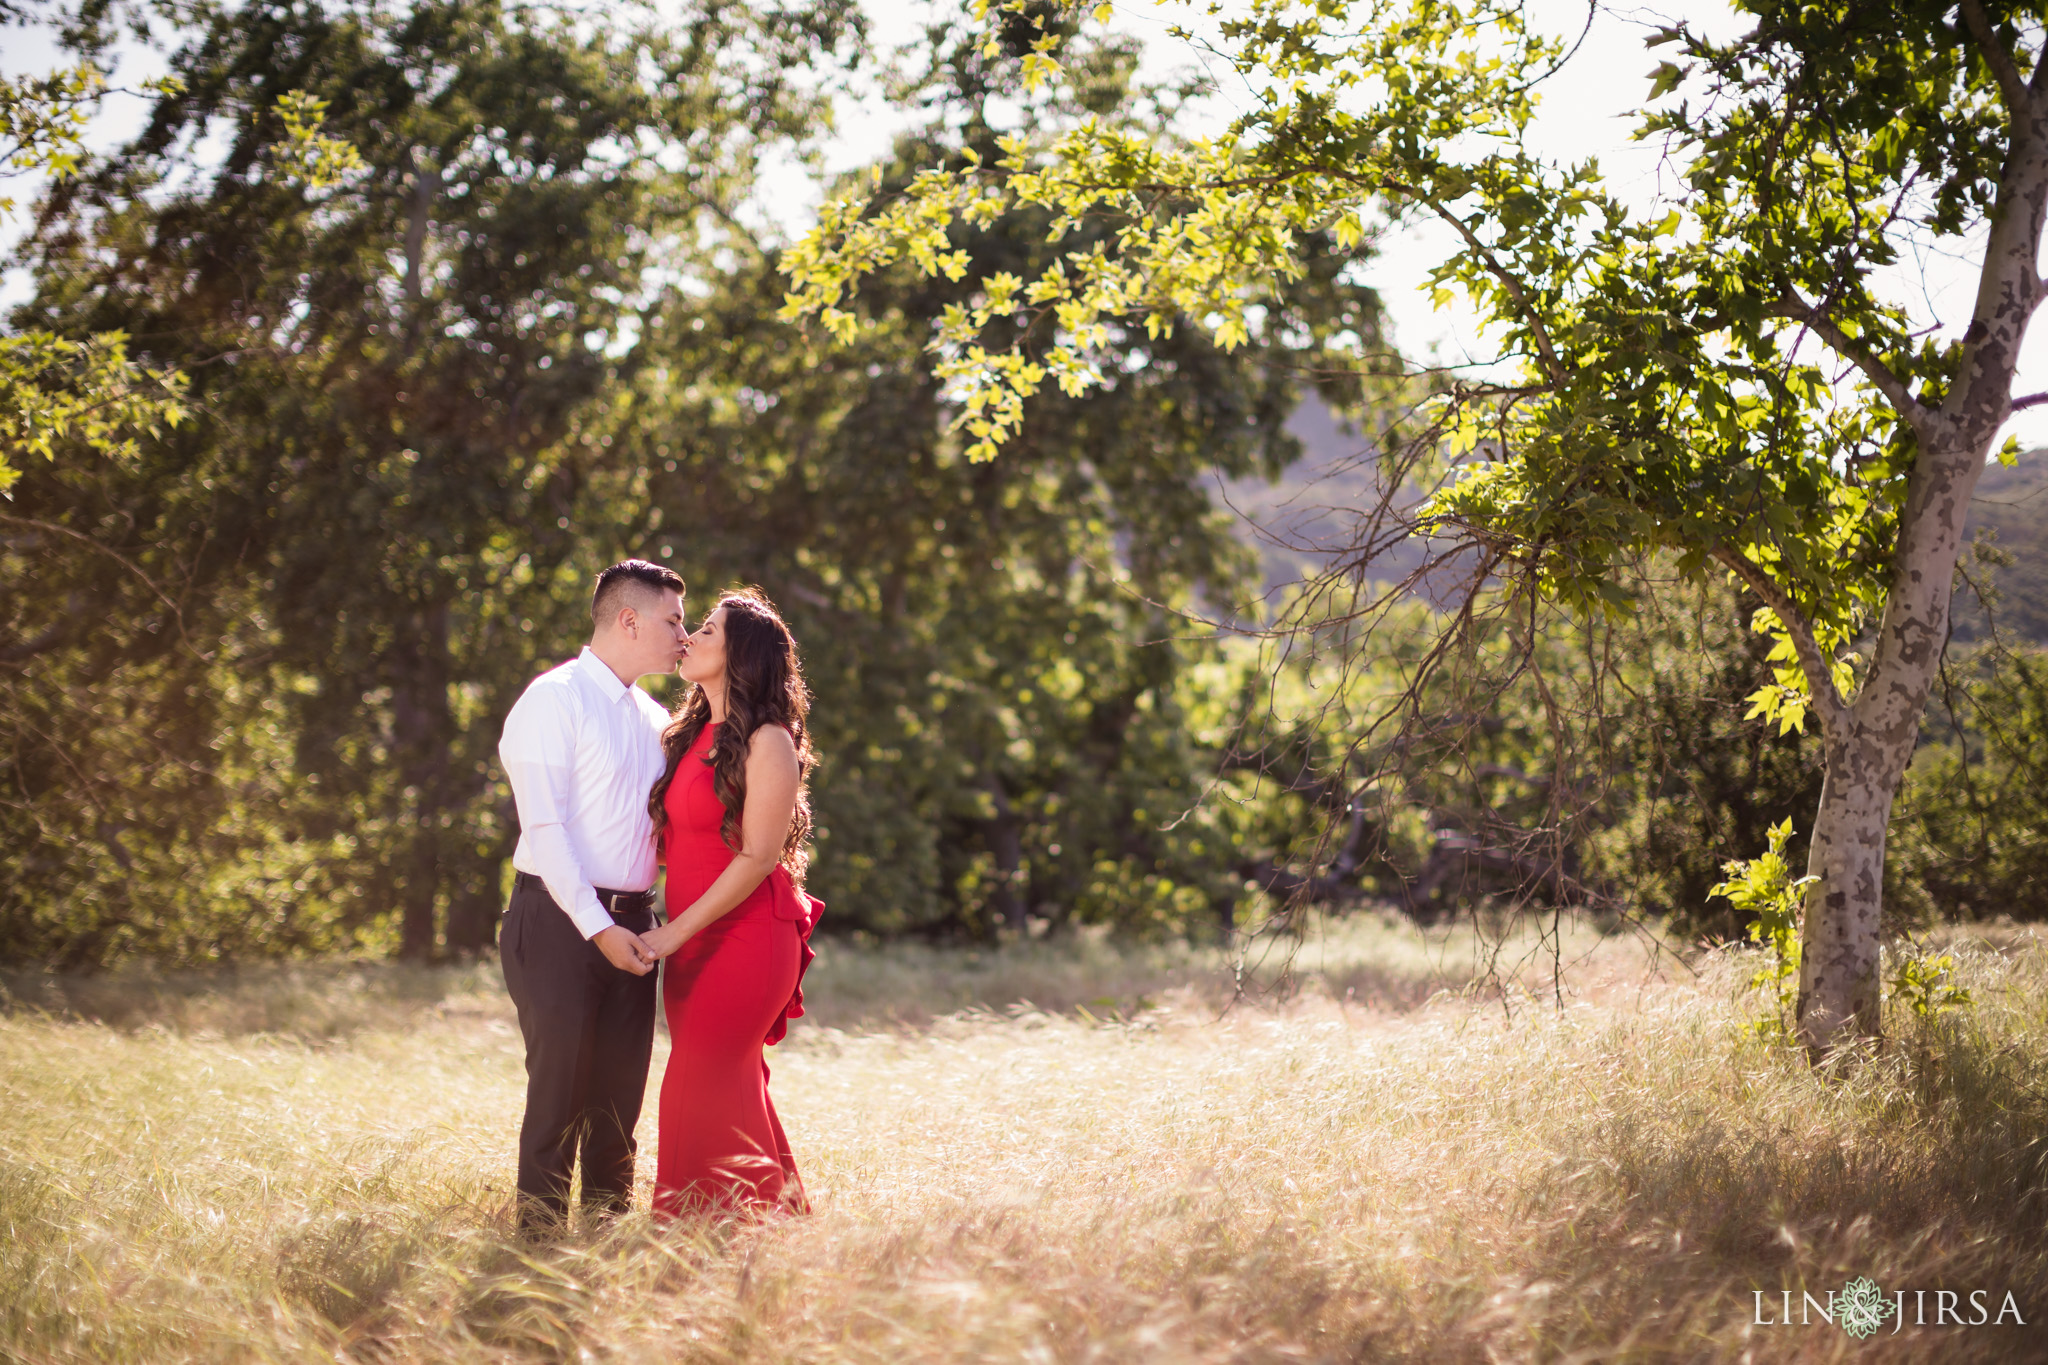 02-james-dilley-orange-county-beach-engagement-photography